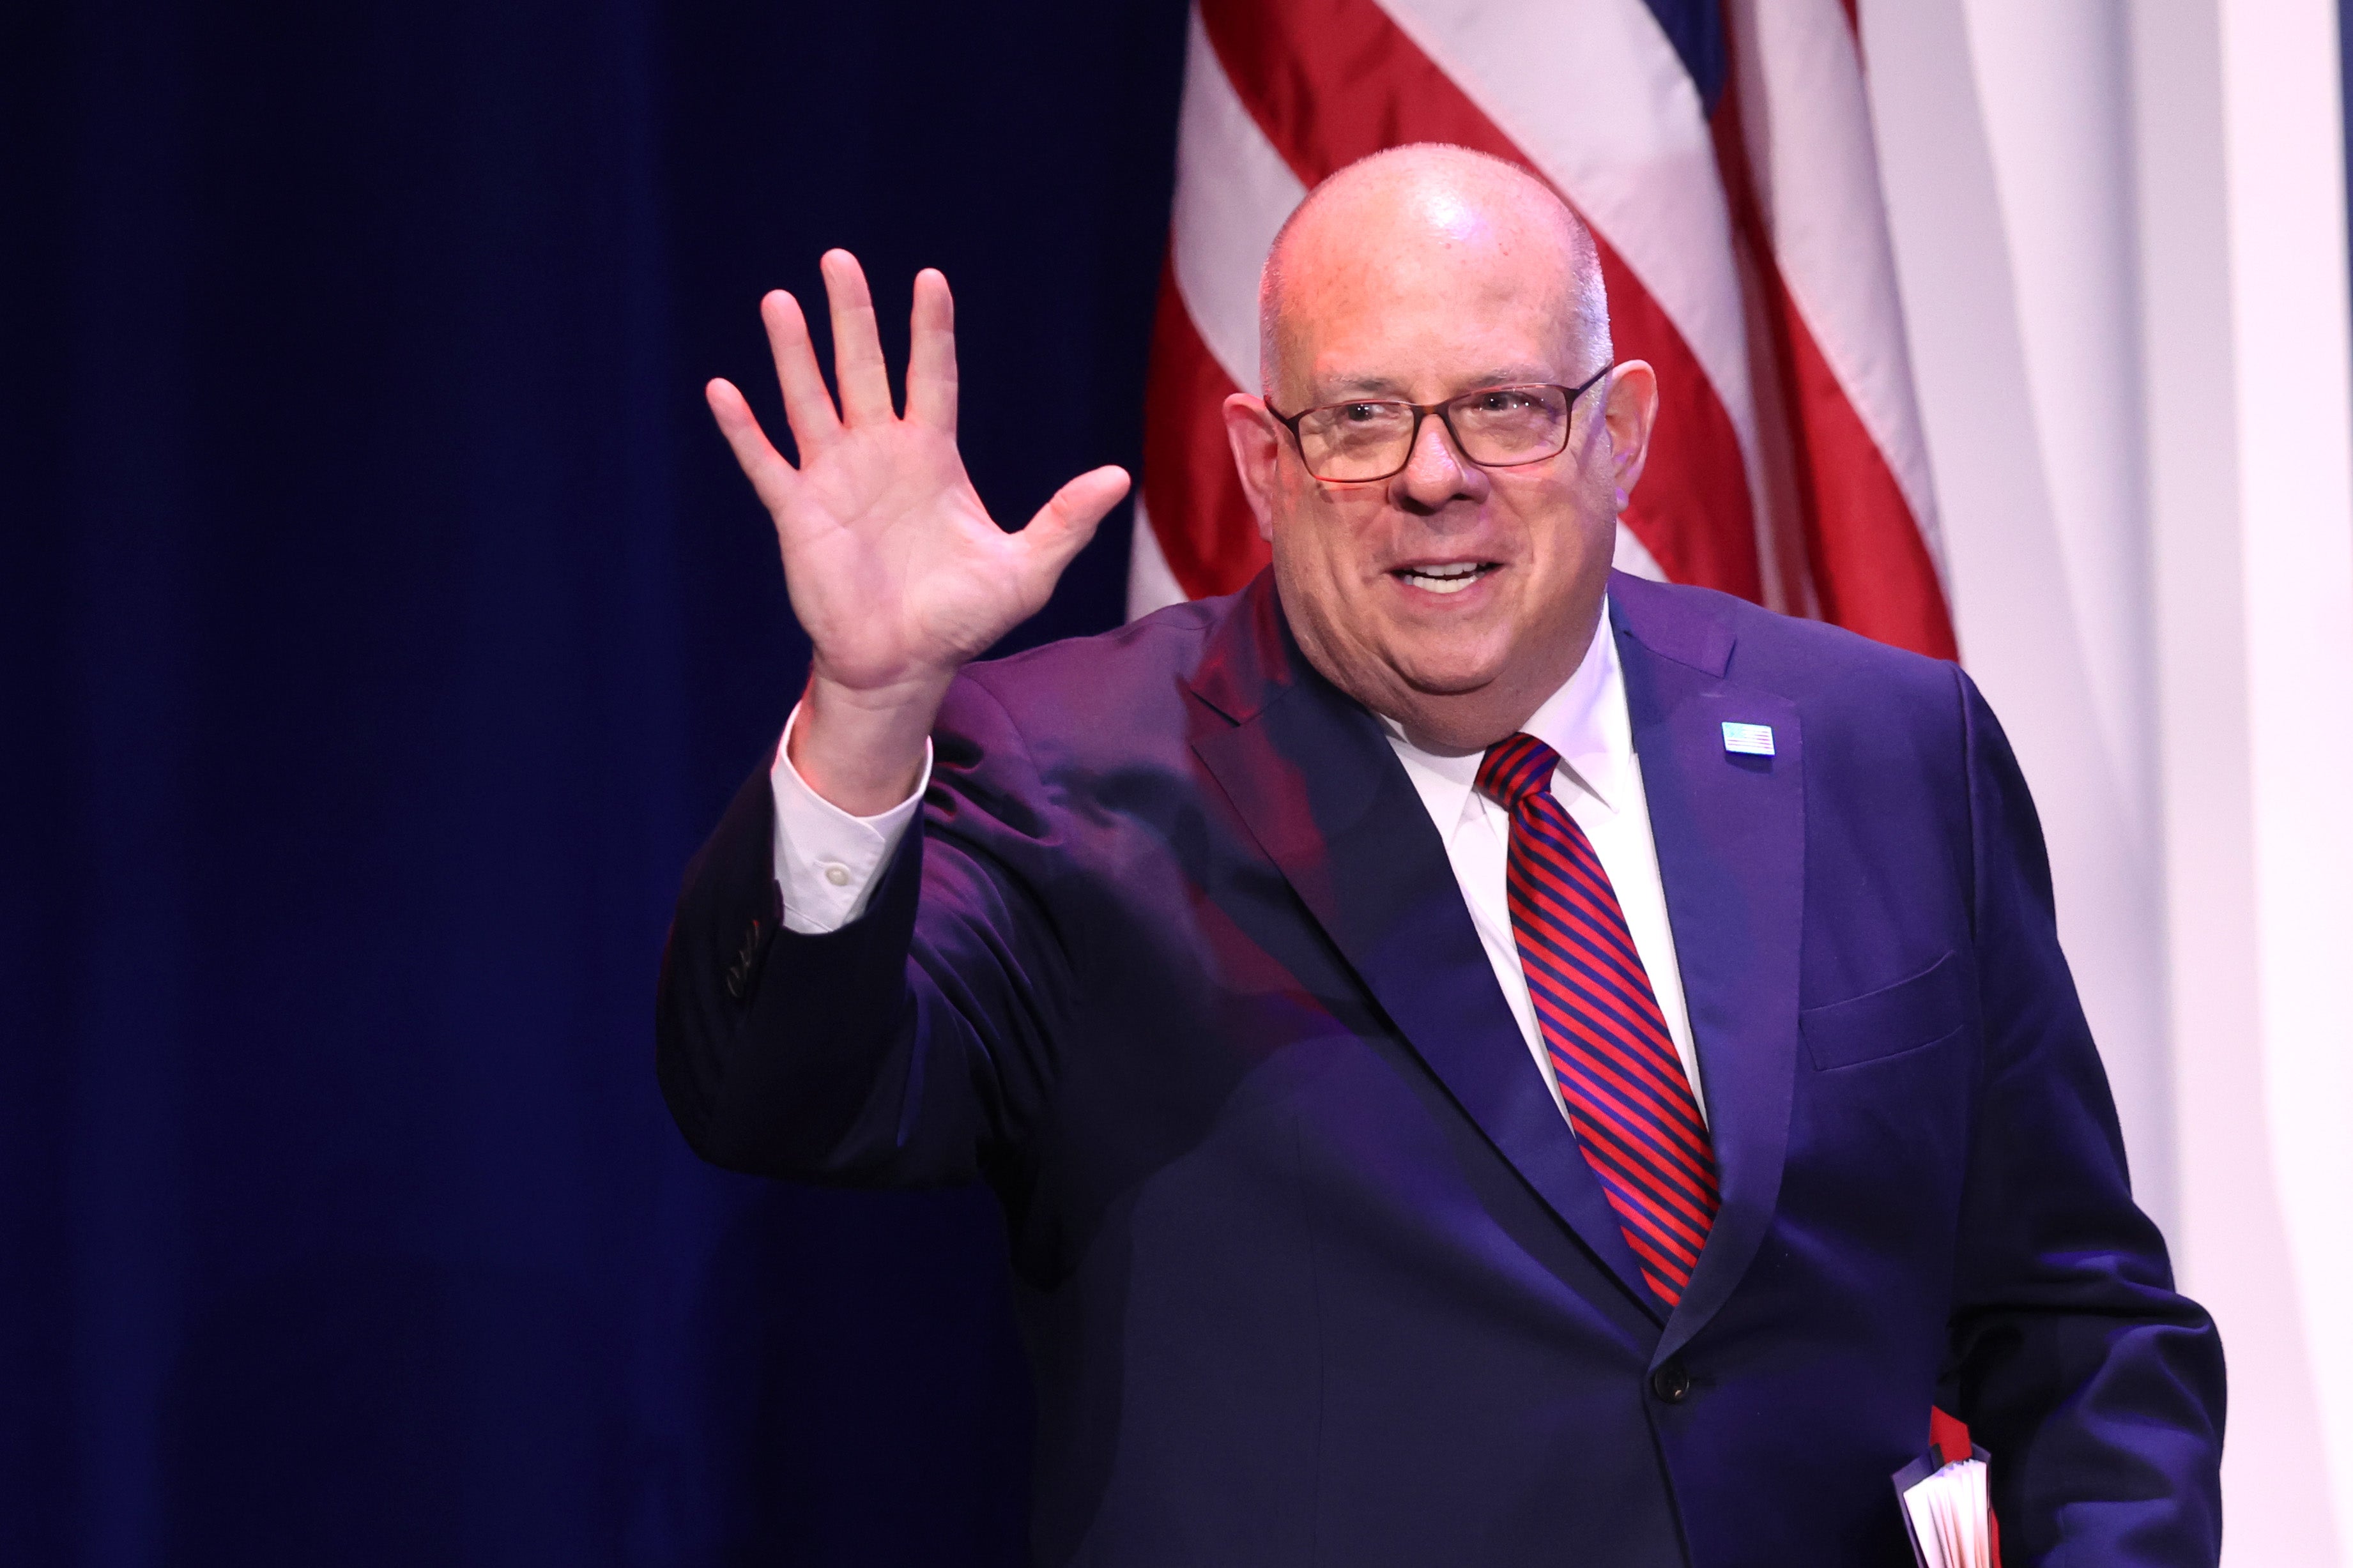 Maryland Governor Larry Hogan speaks to guests at the Republican Jewish Coalition Annual Leadership Meeting on November 18, 2022 in Las Vegas, Nevada